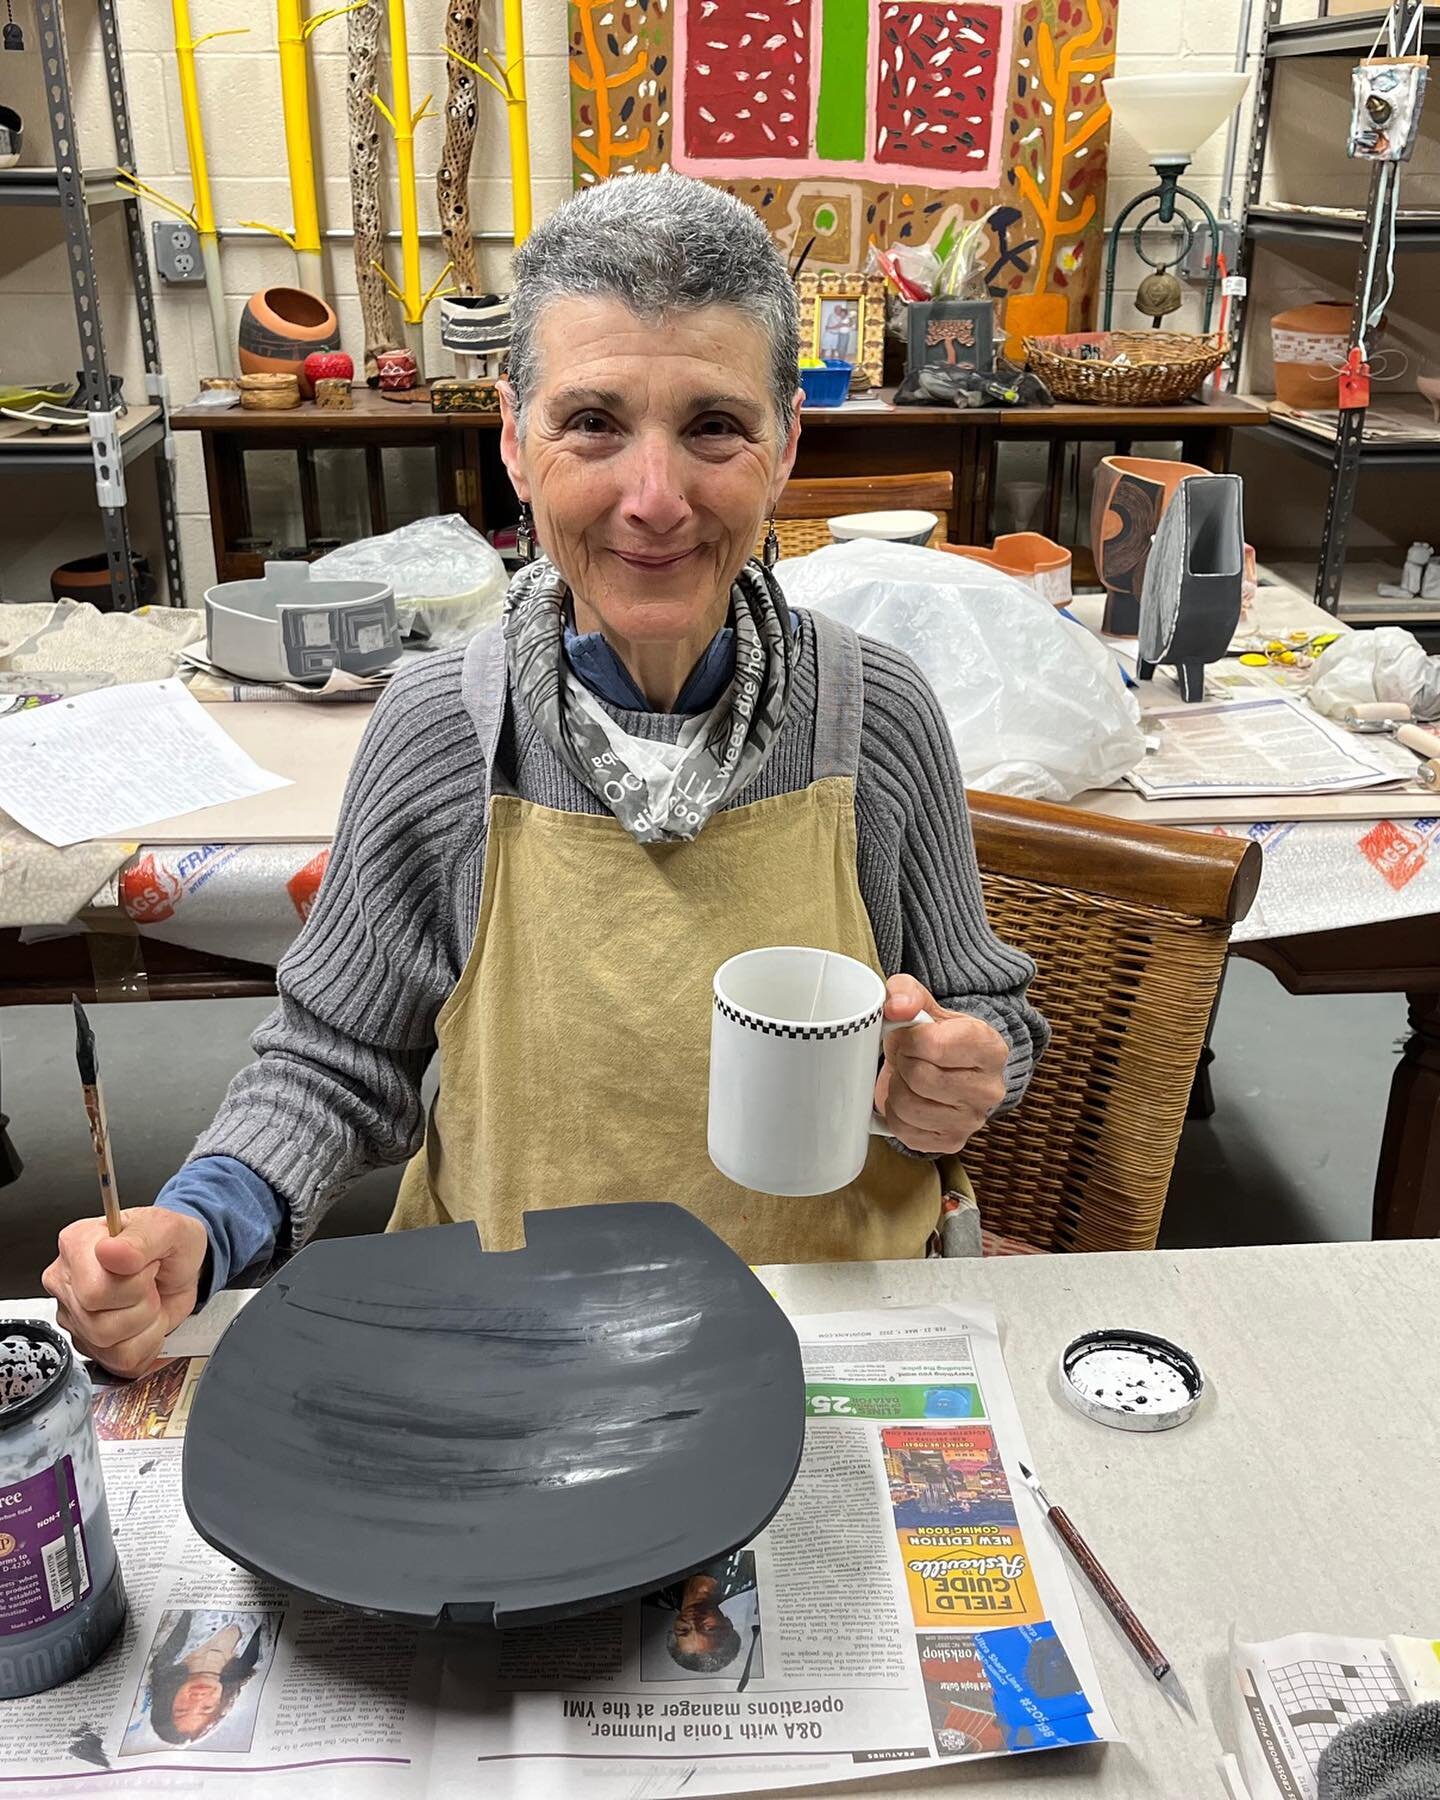 This is my favorite space. The piece is made, the underglaze is drying. NOW ready for the sgraffito. (Carving through that black underglaze) #odysseycoopgallery #marslandinggalleries #kenilworthartistsassociation #ashevillemarquee #sandhillartistscol